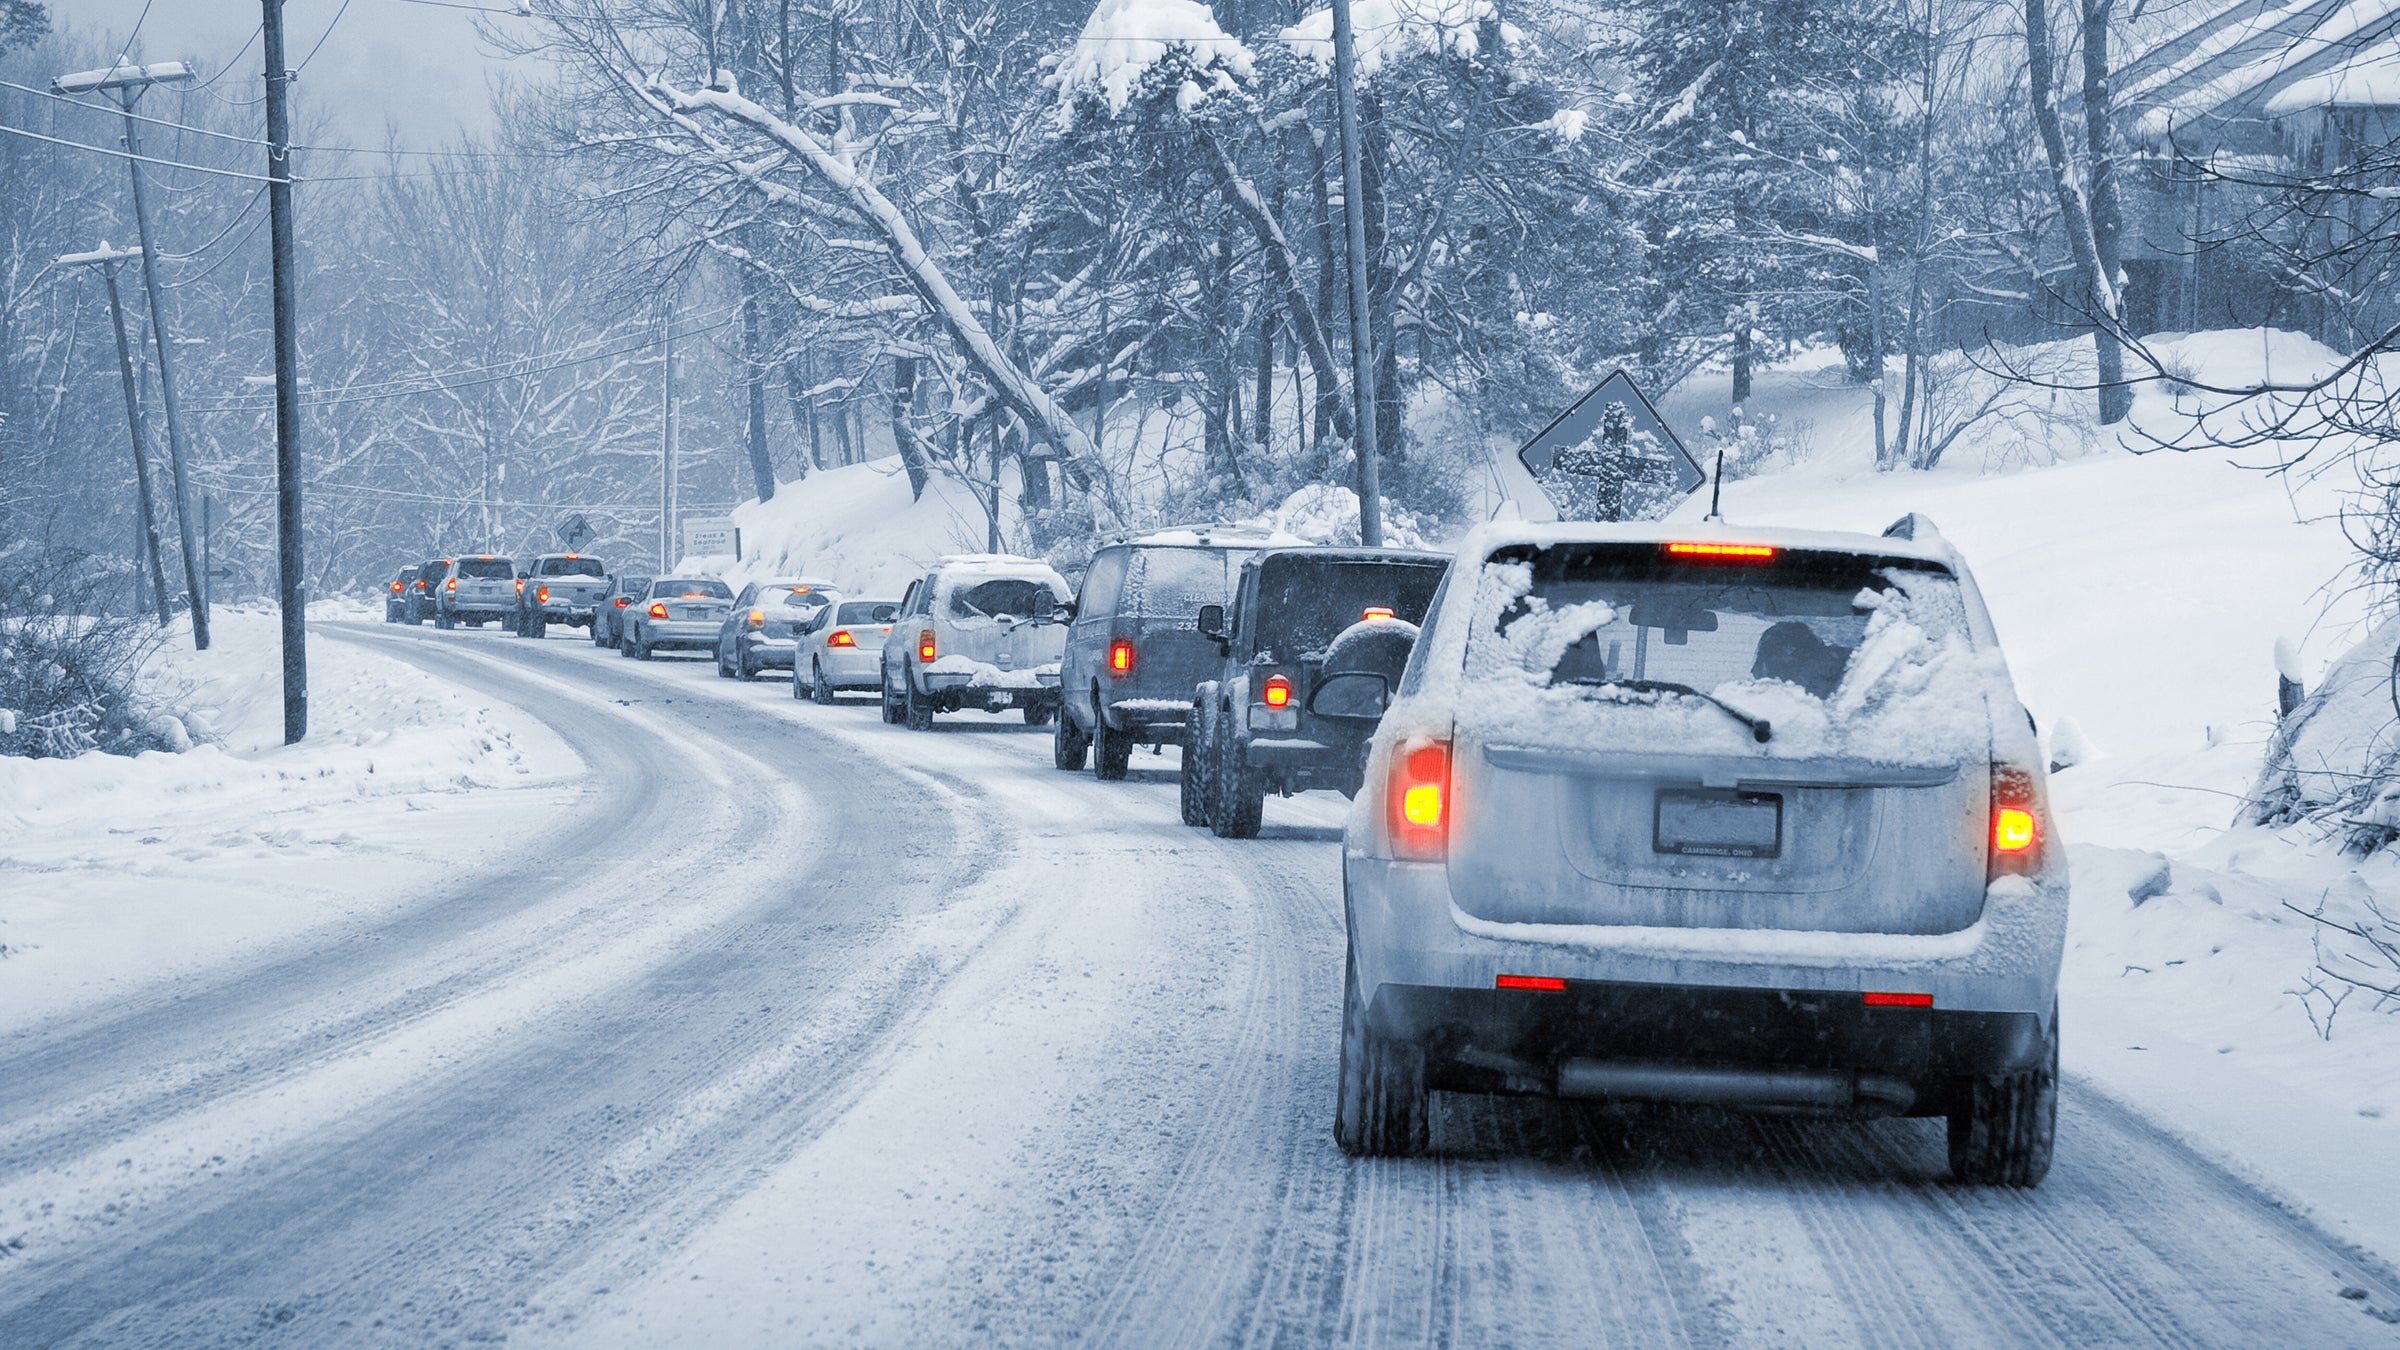 3 Tips for Shopping for a Used Car in Winter - The Car Guide